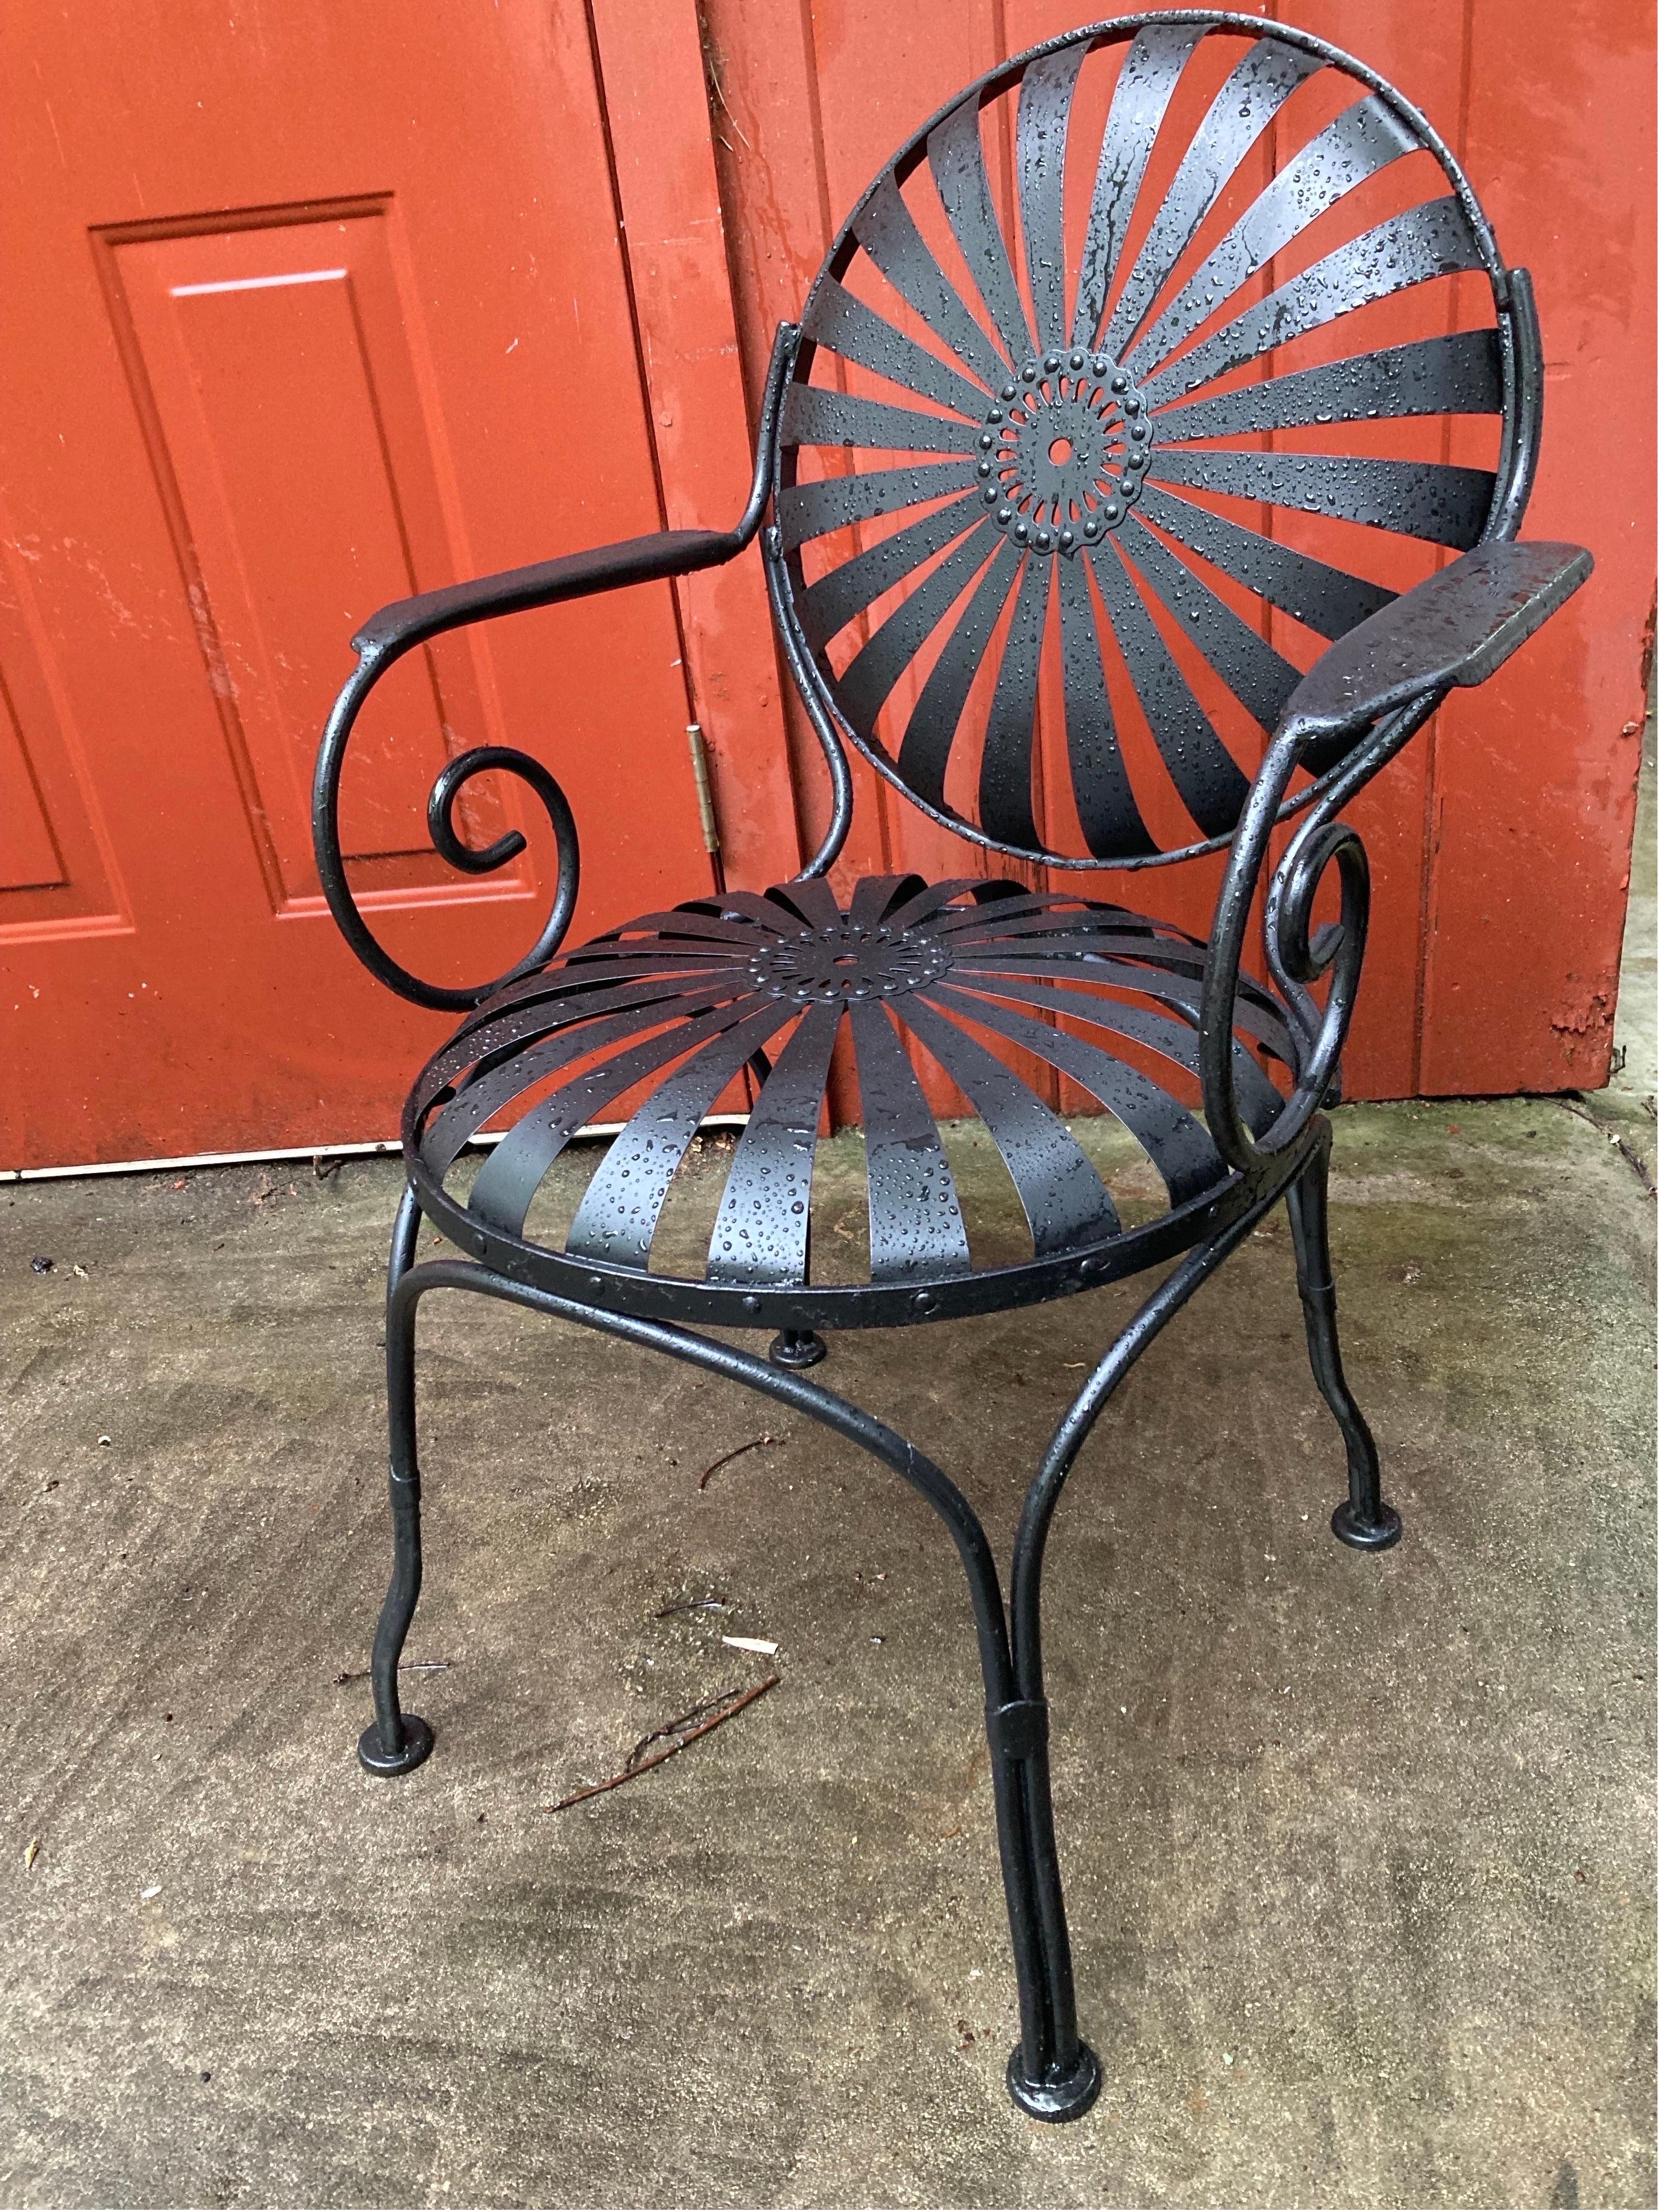 beautifully redone pair of garden chairs, sandblasted primed and painted in satin black,
no maker’s mark… 
these would work indoors or outside
can withstand heat and direct sun